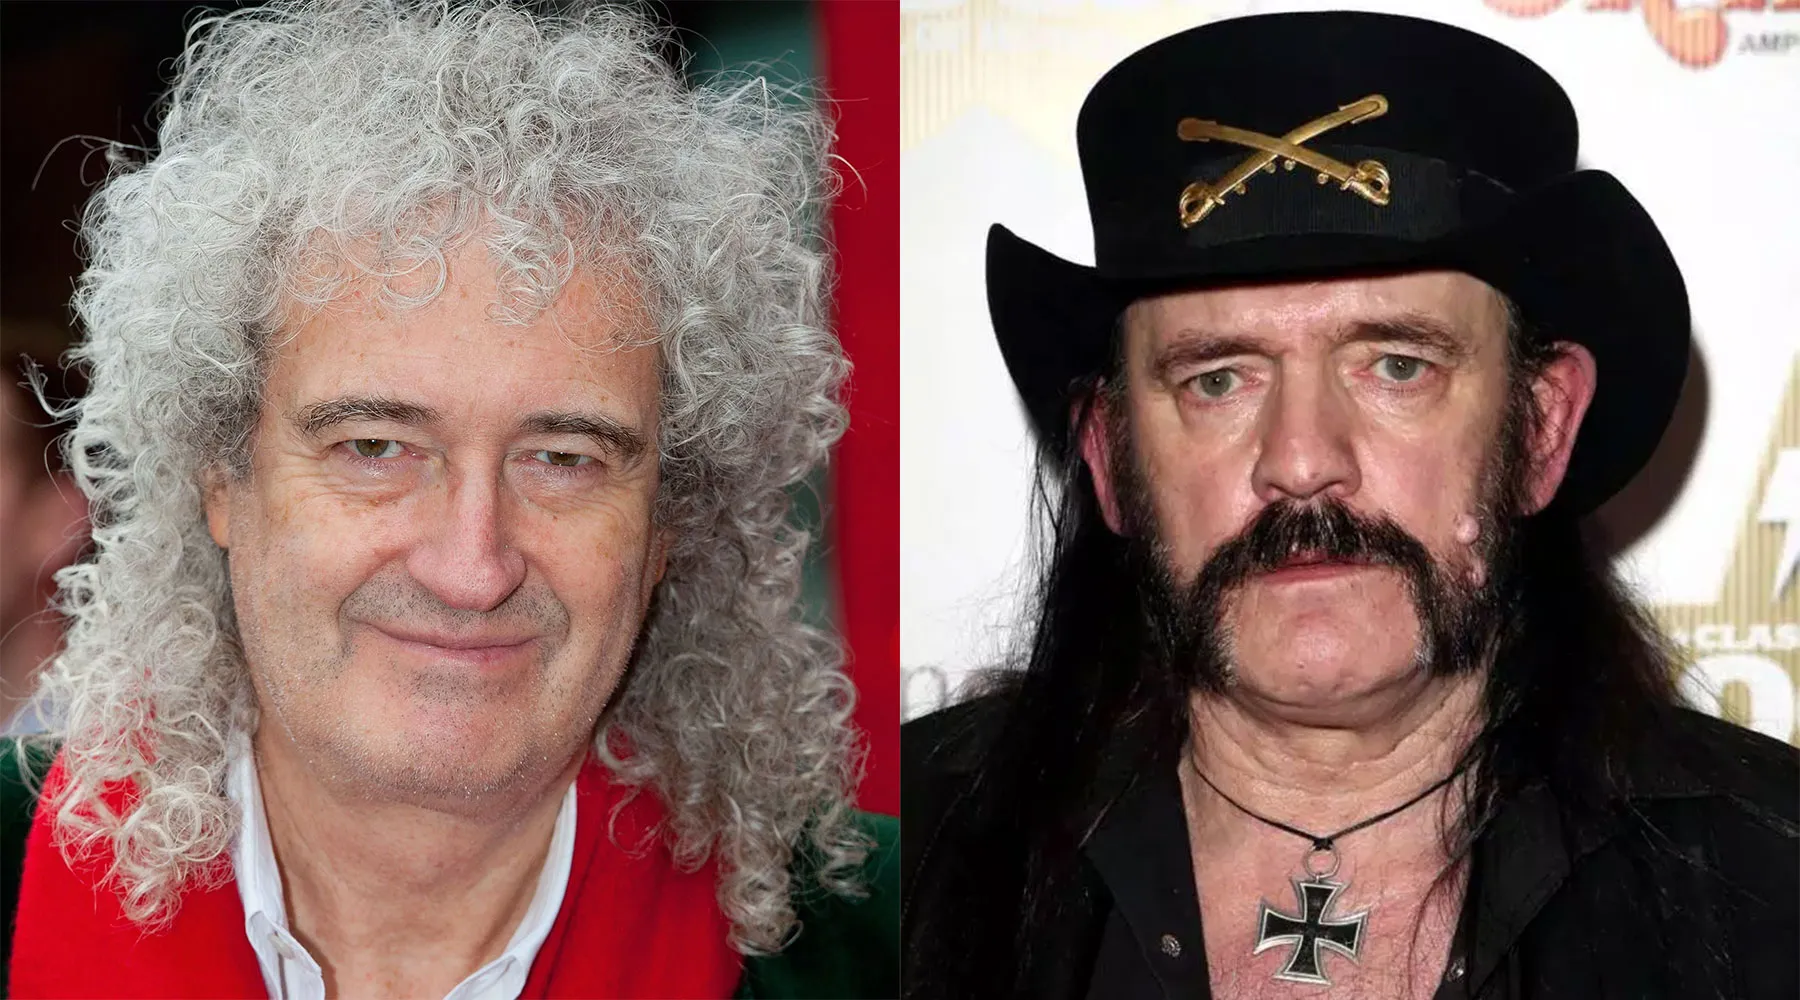 Brian May and Lemmy Kilmister